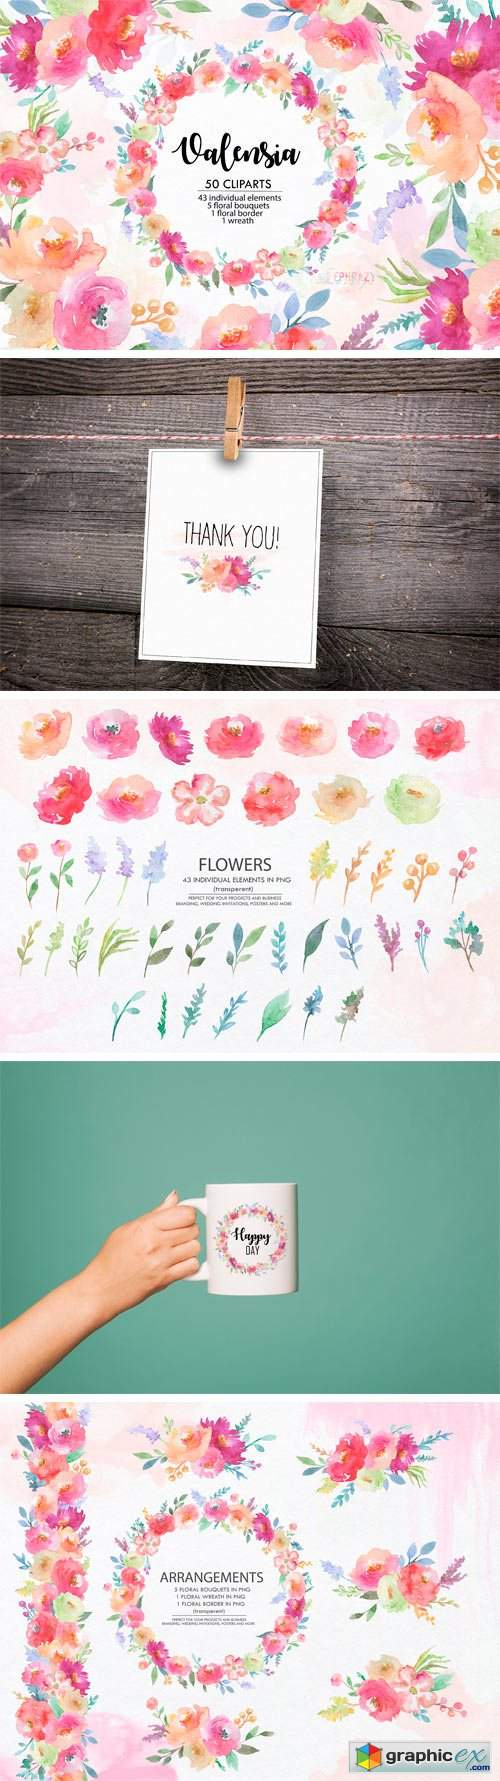 Valensia. Floral Clipart. Watercolor